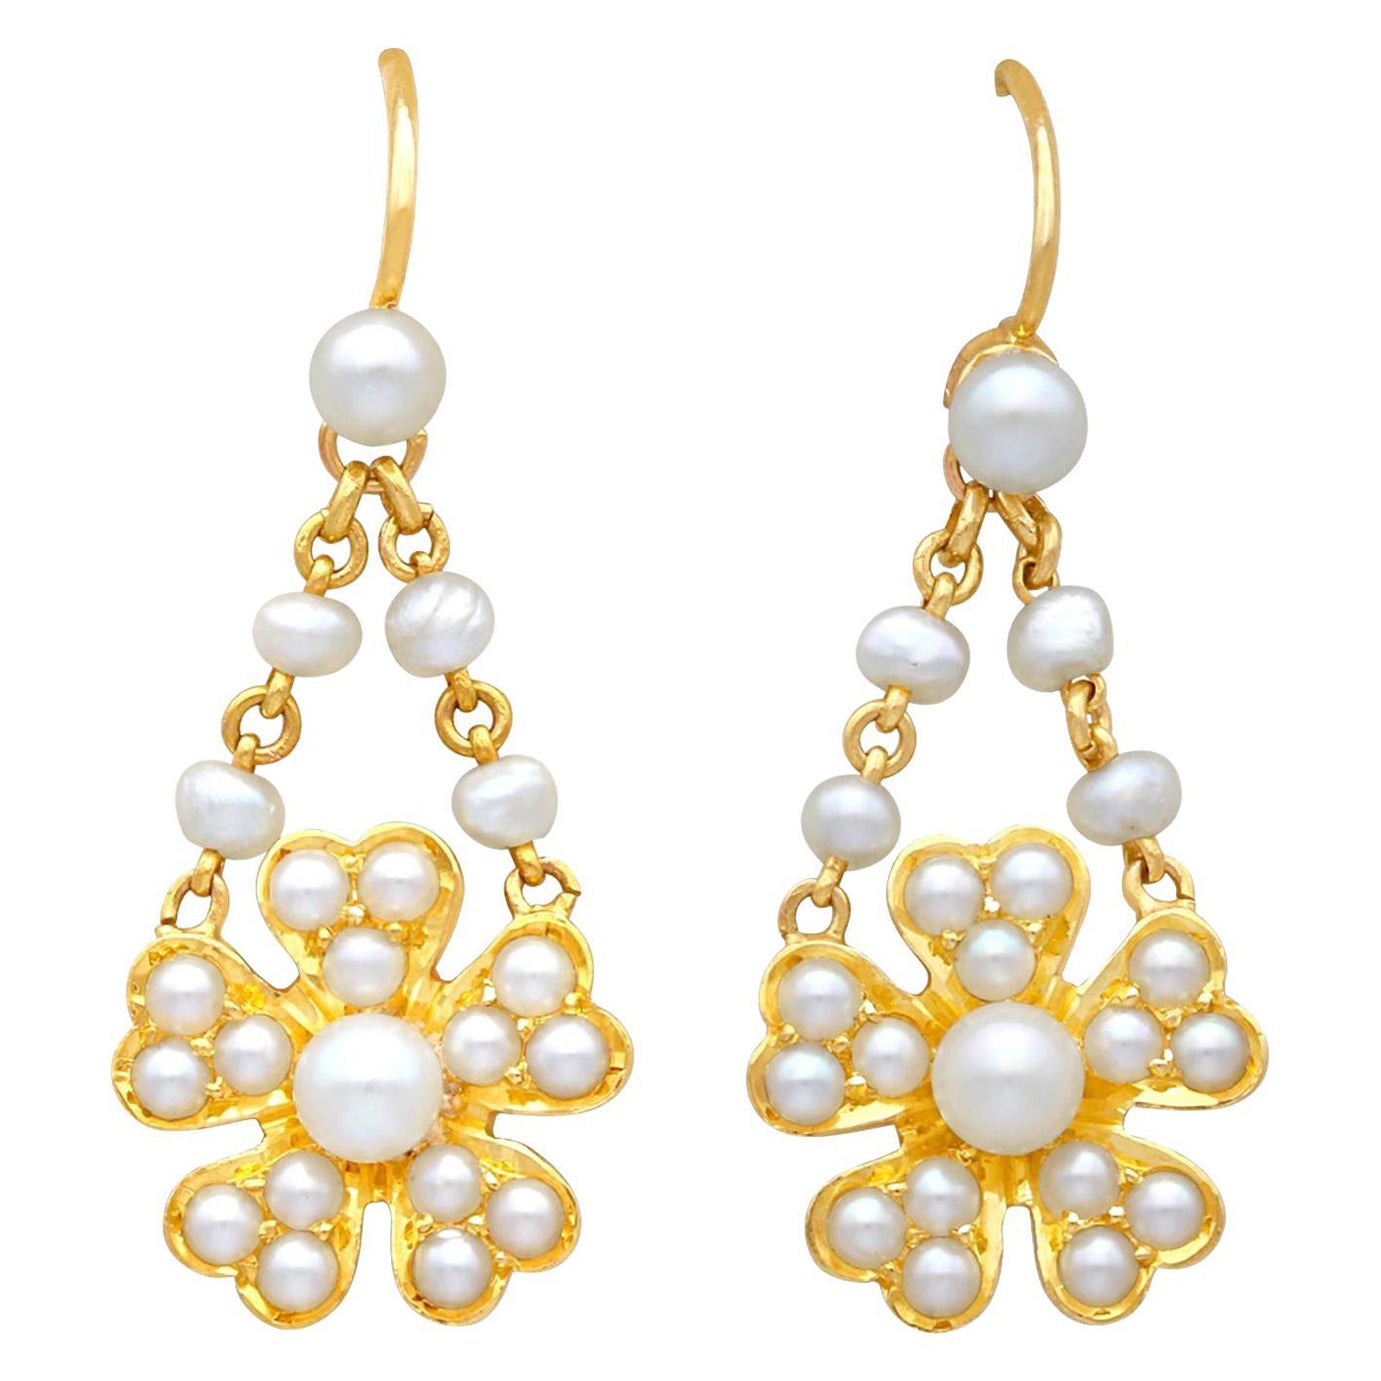 Antique Seed Pearl and 18k Yellow Gold Drop Earrings, Circa 1890 For Sale